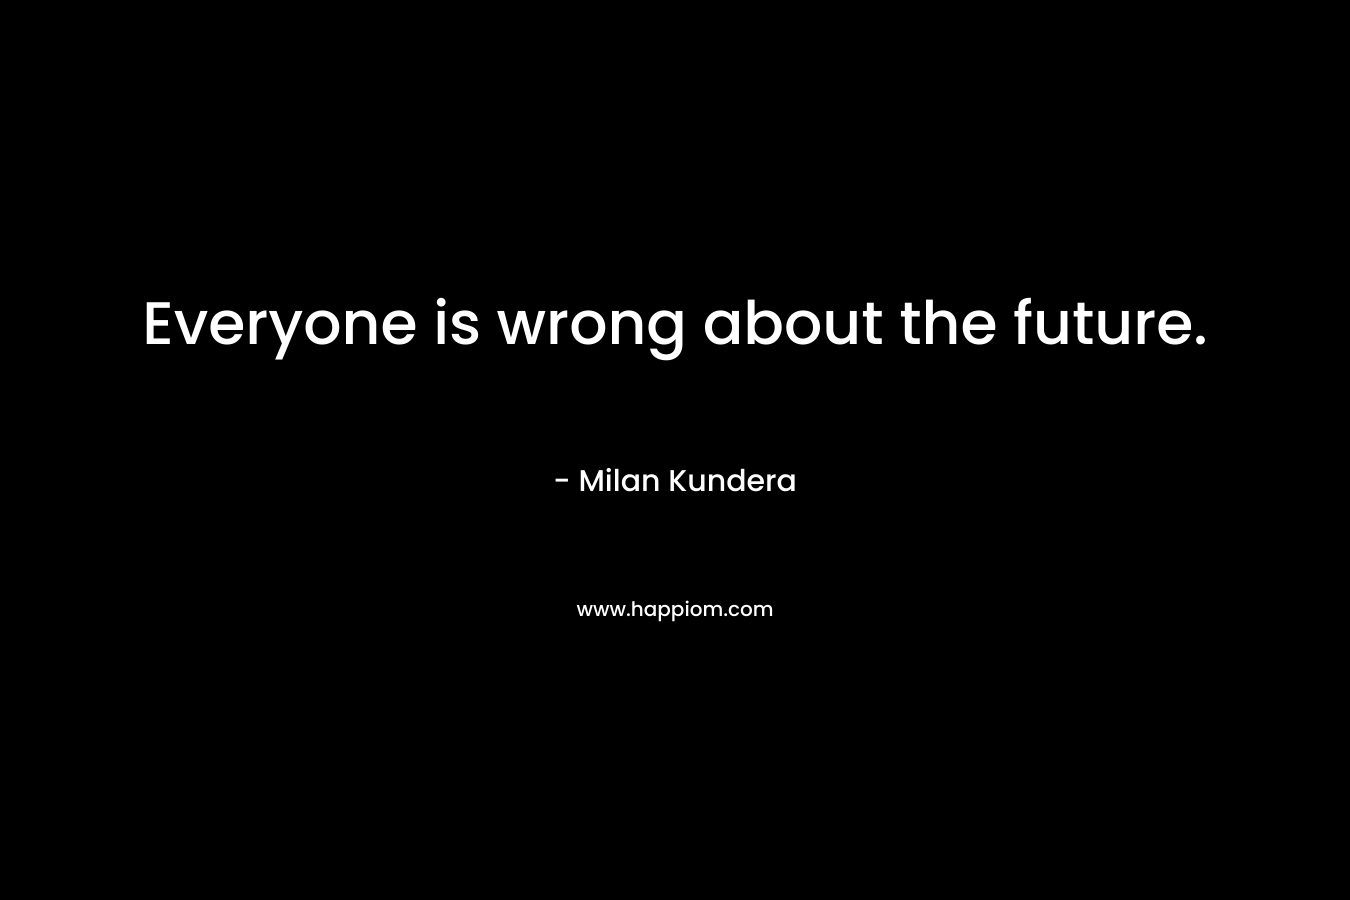 Everyone is wrong about the future.